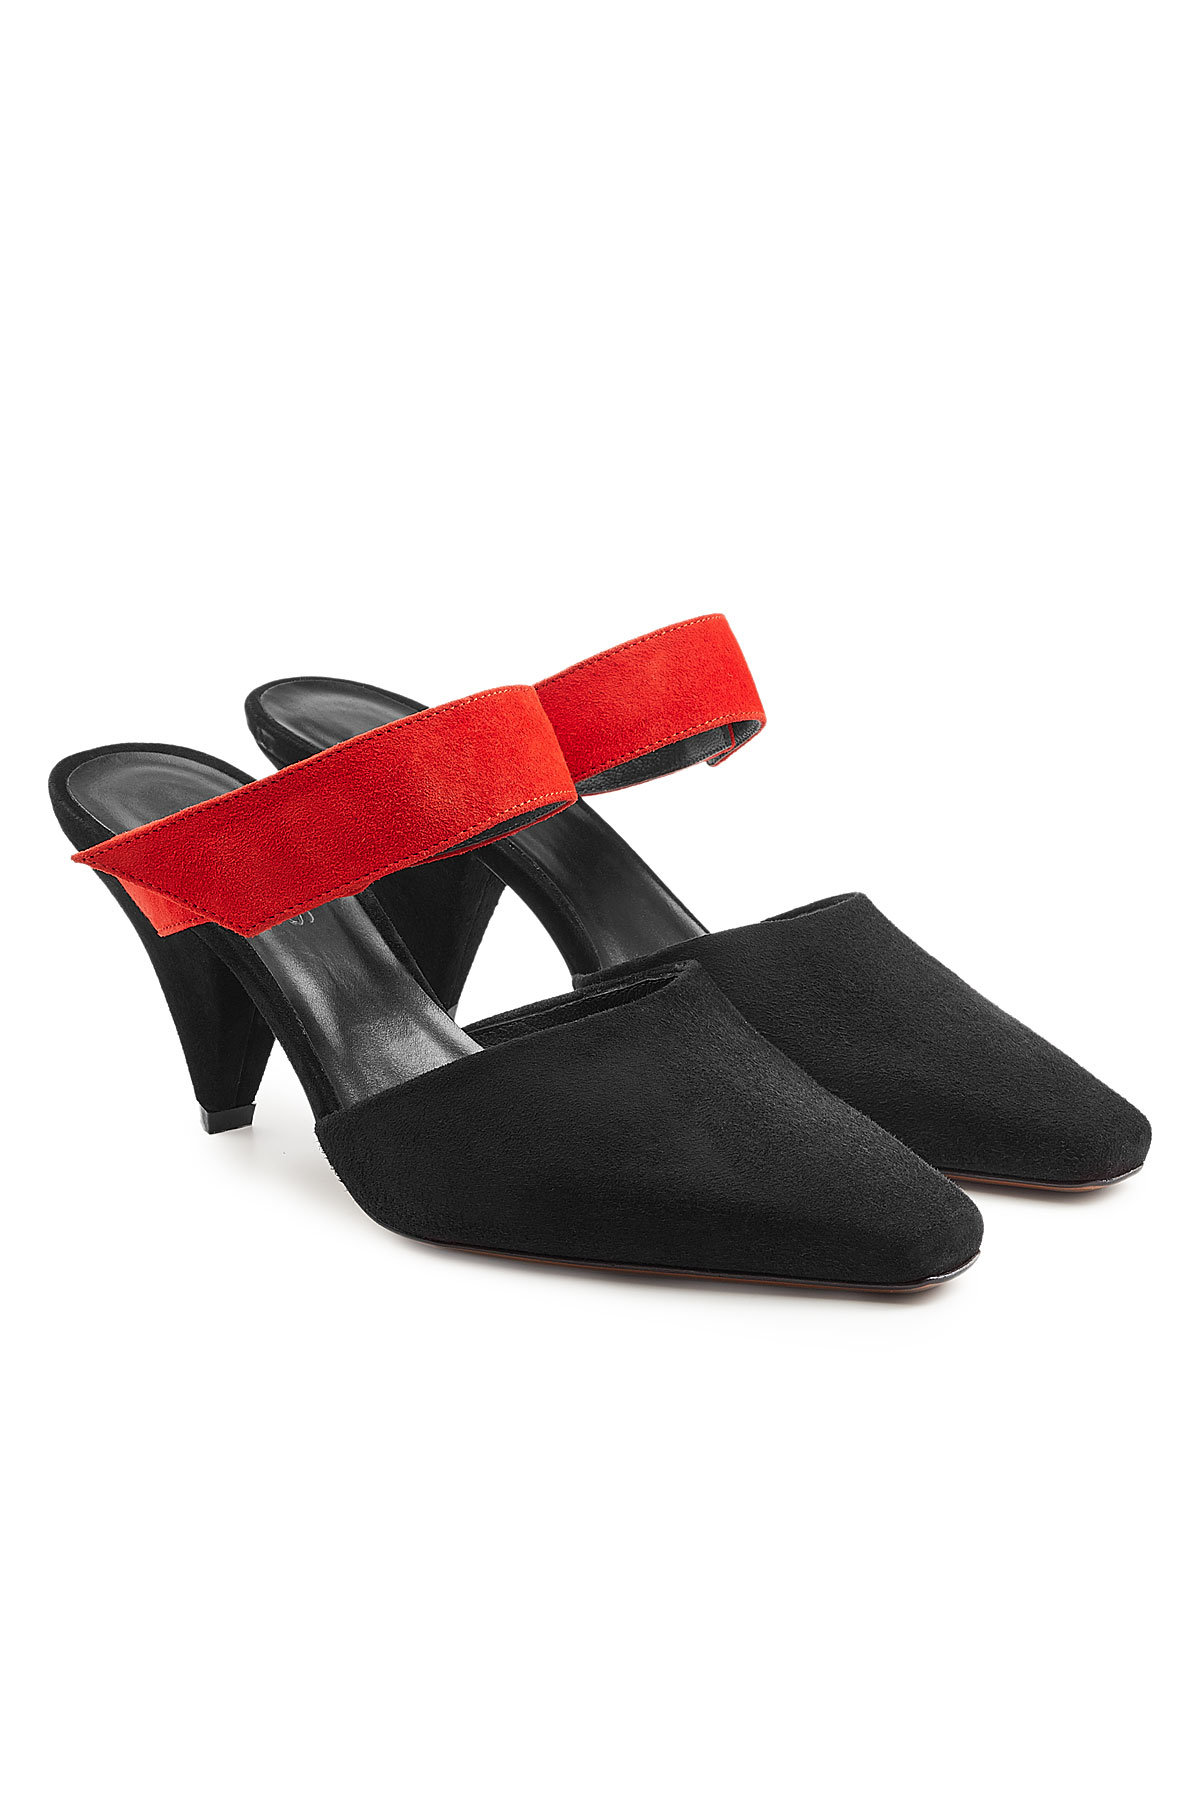 Neous - Seven Suede Mules